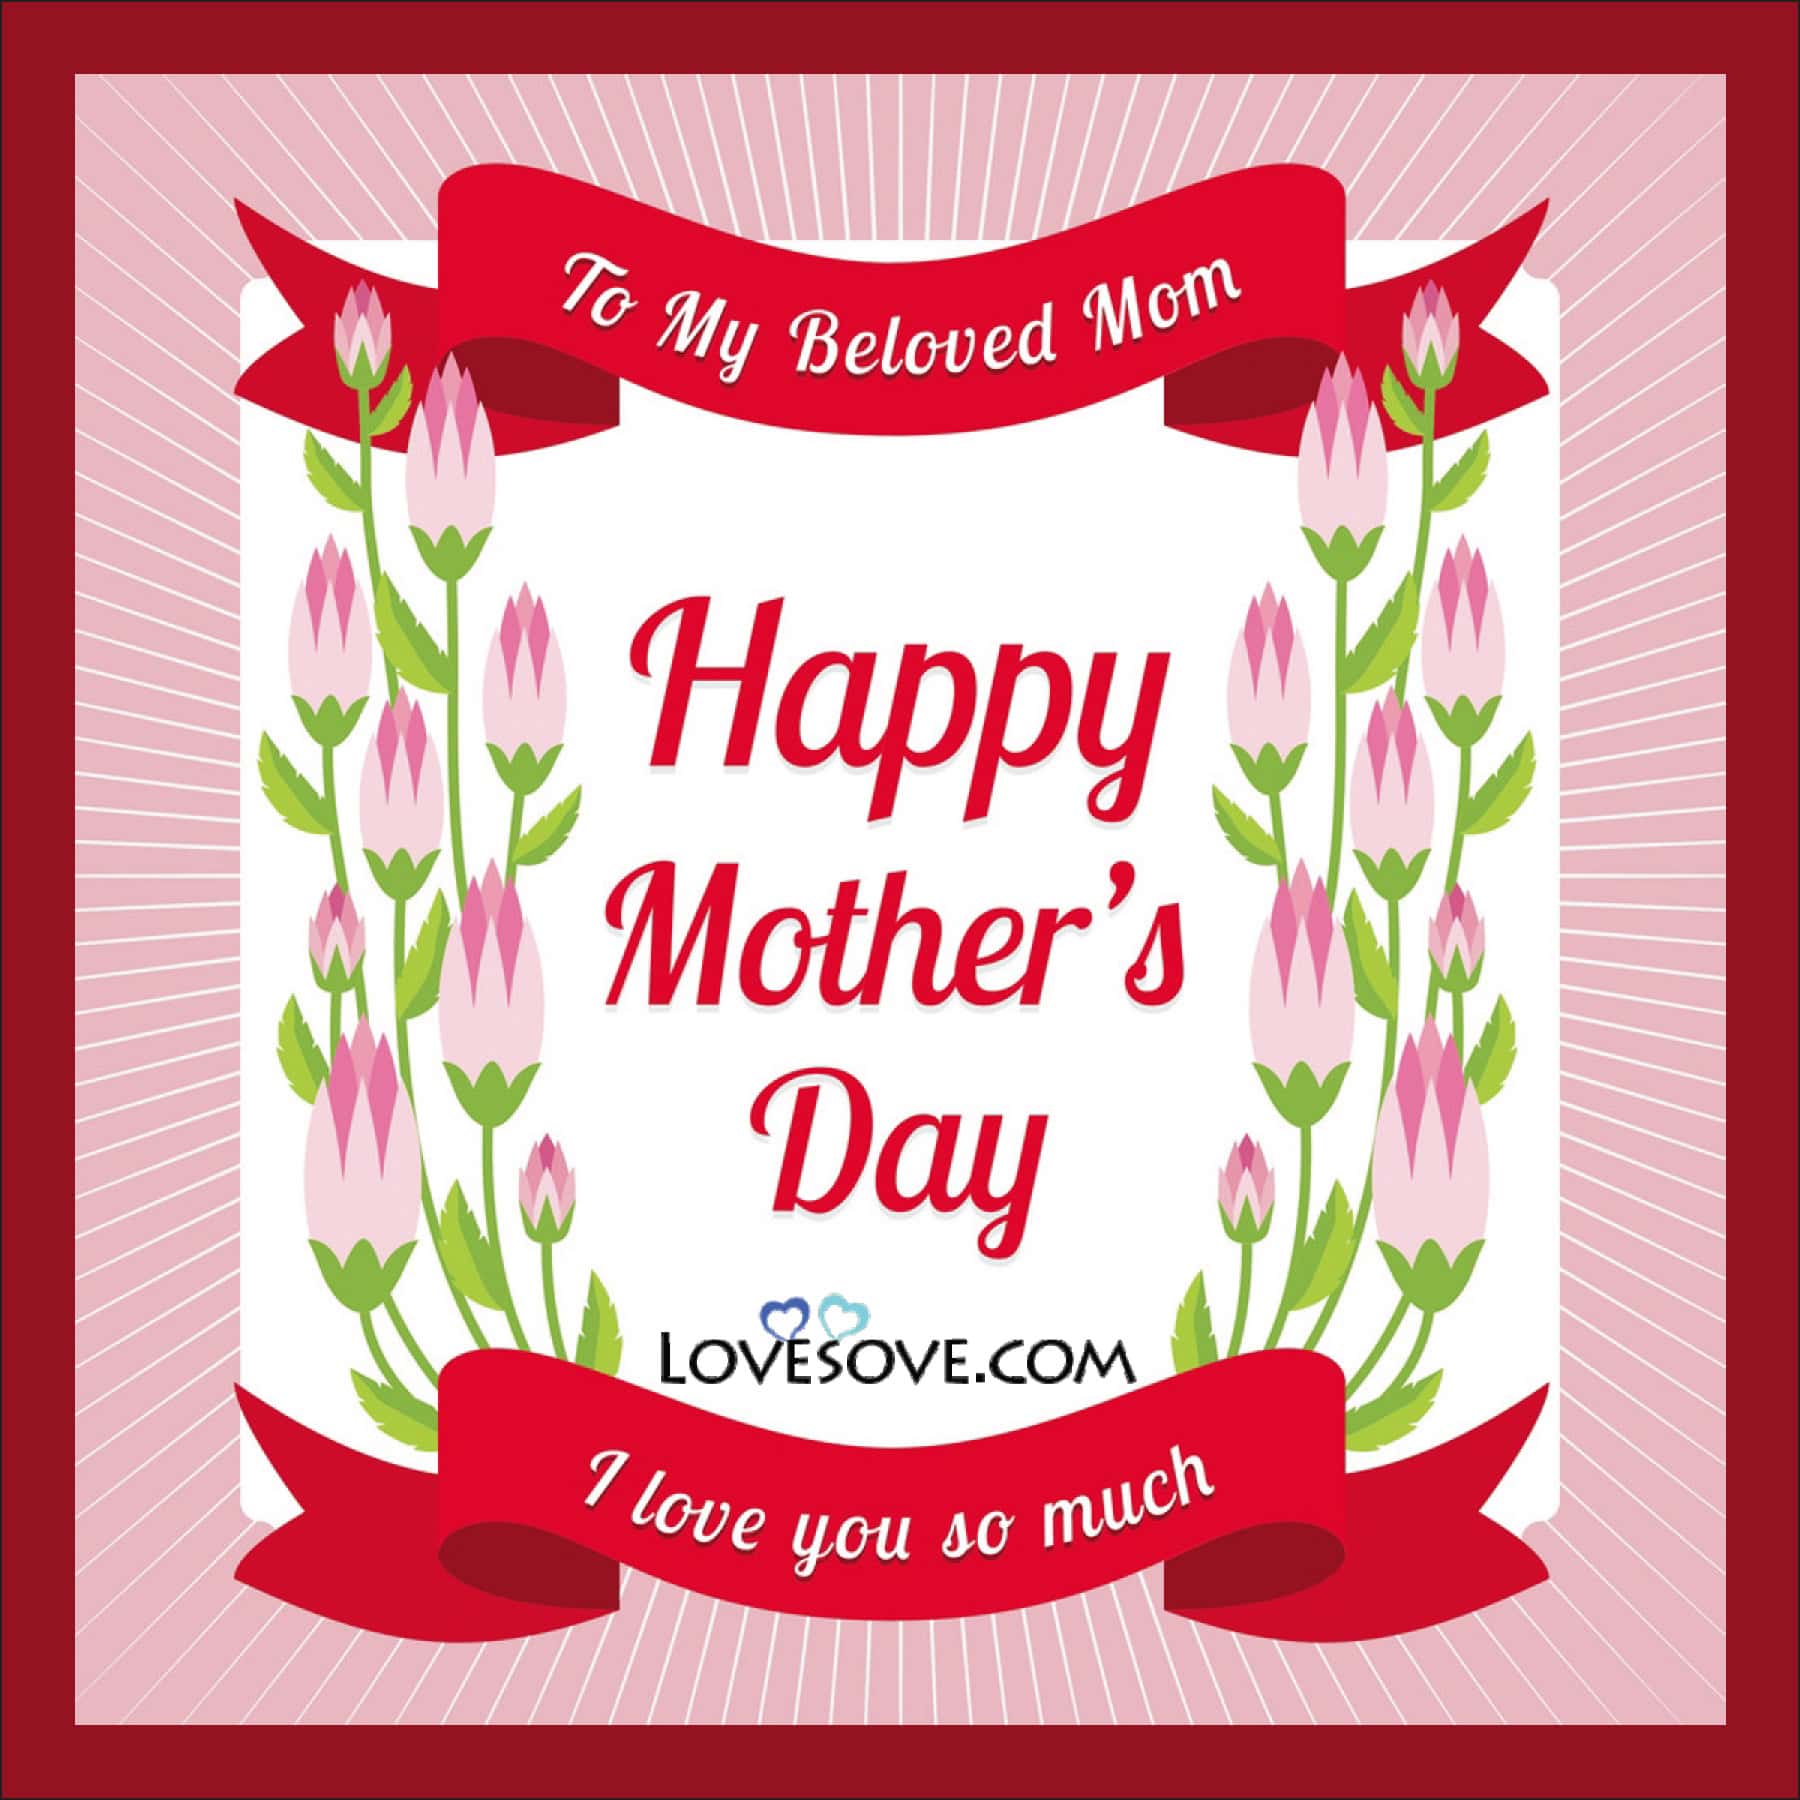 Mothers-Day-Lovely-Wishes-Lovesove